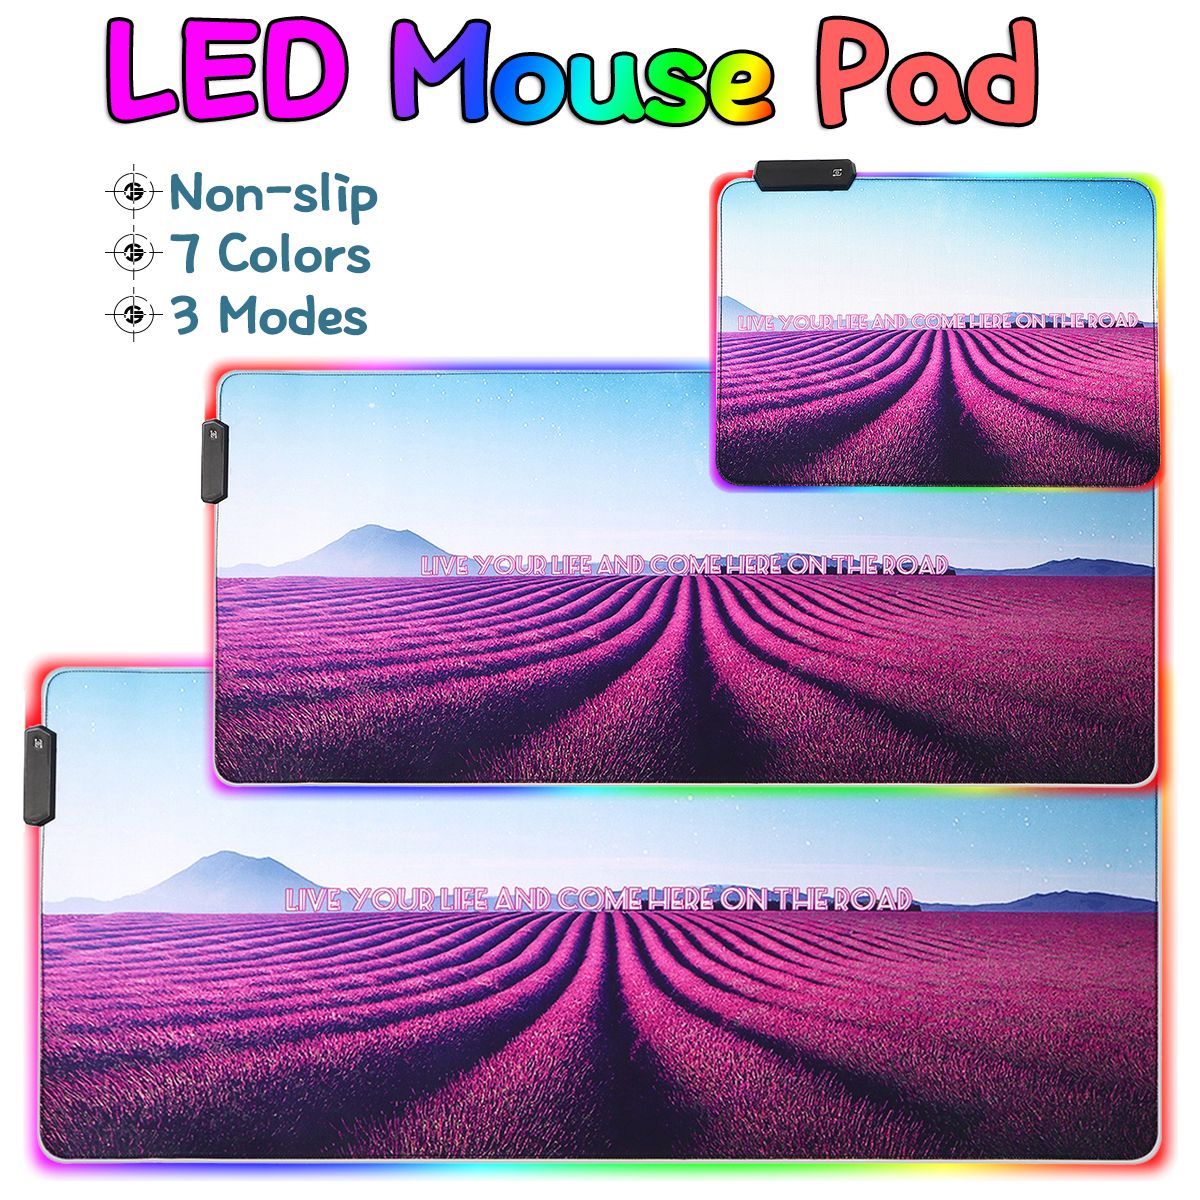 The-Lavender-USB-Wired-Colorful-LED-Backlit-Mouse-Pad-for-Gaming-Mouse-E-Sport-1550461